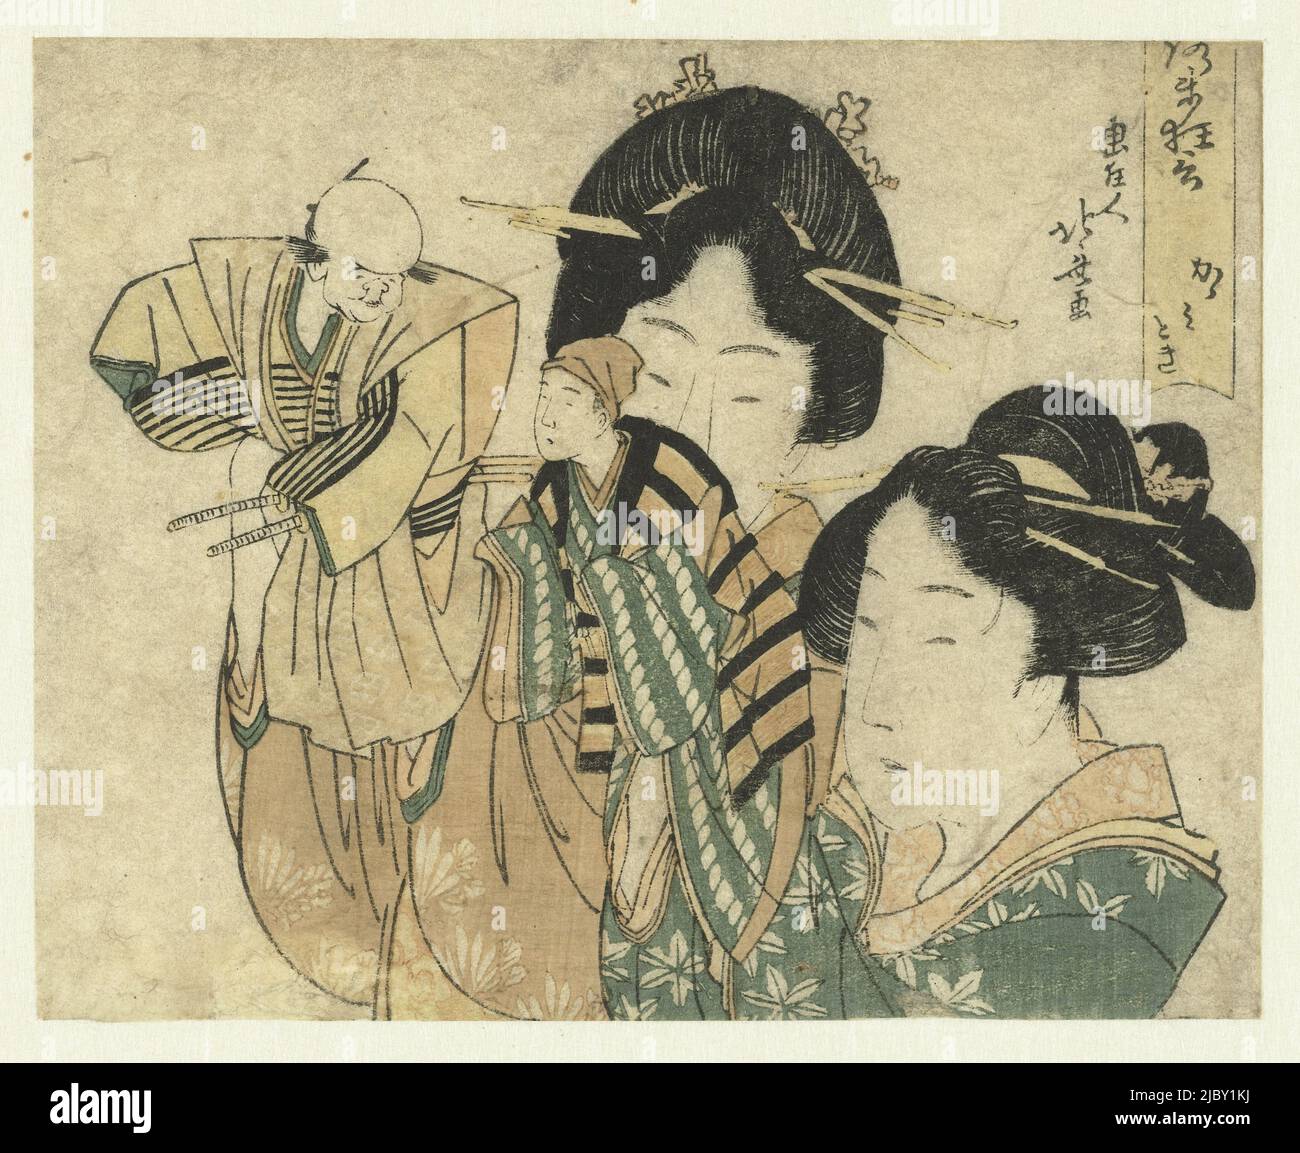 Two women with hand puppets, one doll with a headscarf and one bald samurai. This print represents the comic intermezzo that is performed during puppetry (jôruri). The poems are cut from this print, The mirror polisher Kagamitogi, Comic interlude (series title on object) Noroma kyôgen (series title on object)., print maker: Katsushika Hokusai, (mentioned on object), Japan, c. 1800 - c. 1805, paper, colour woodcut, h 103 mm × w 130 mm Stock Photo